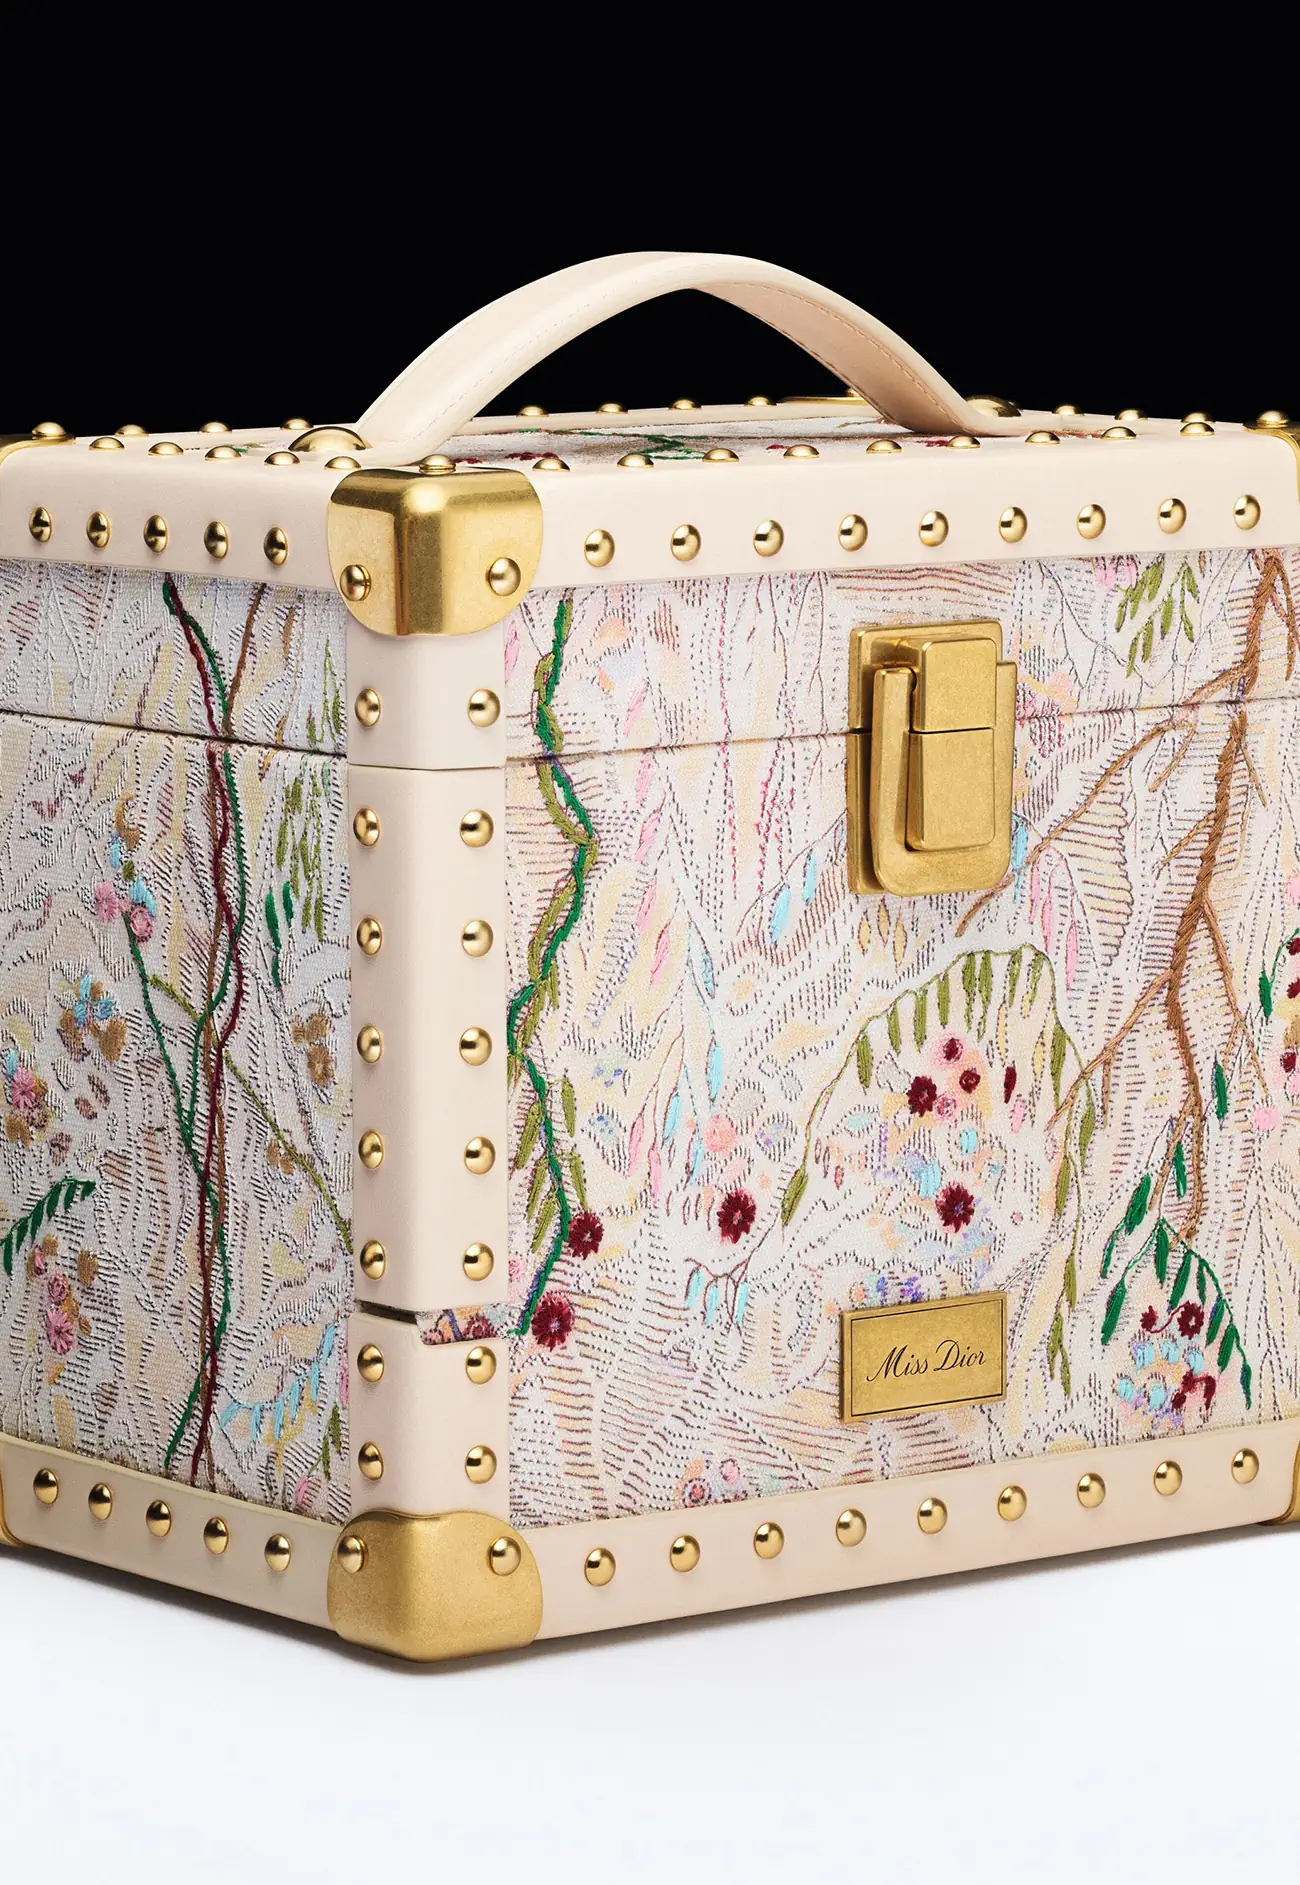 Dior unveils 150 exceptional Miss Dior trunks by Eva Jospin